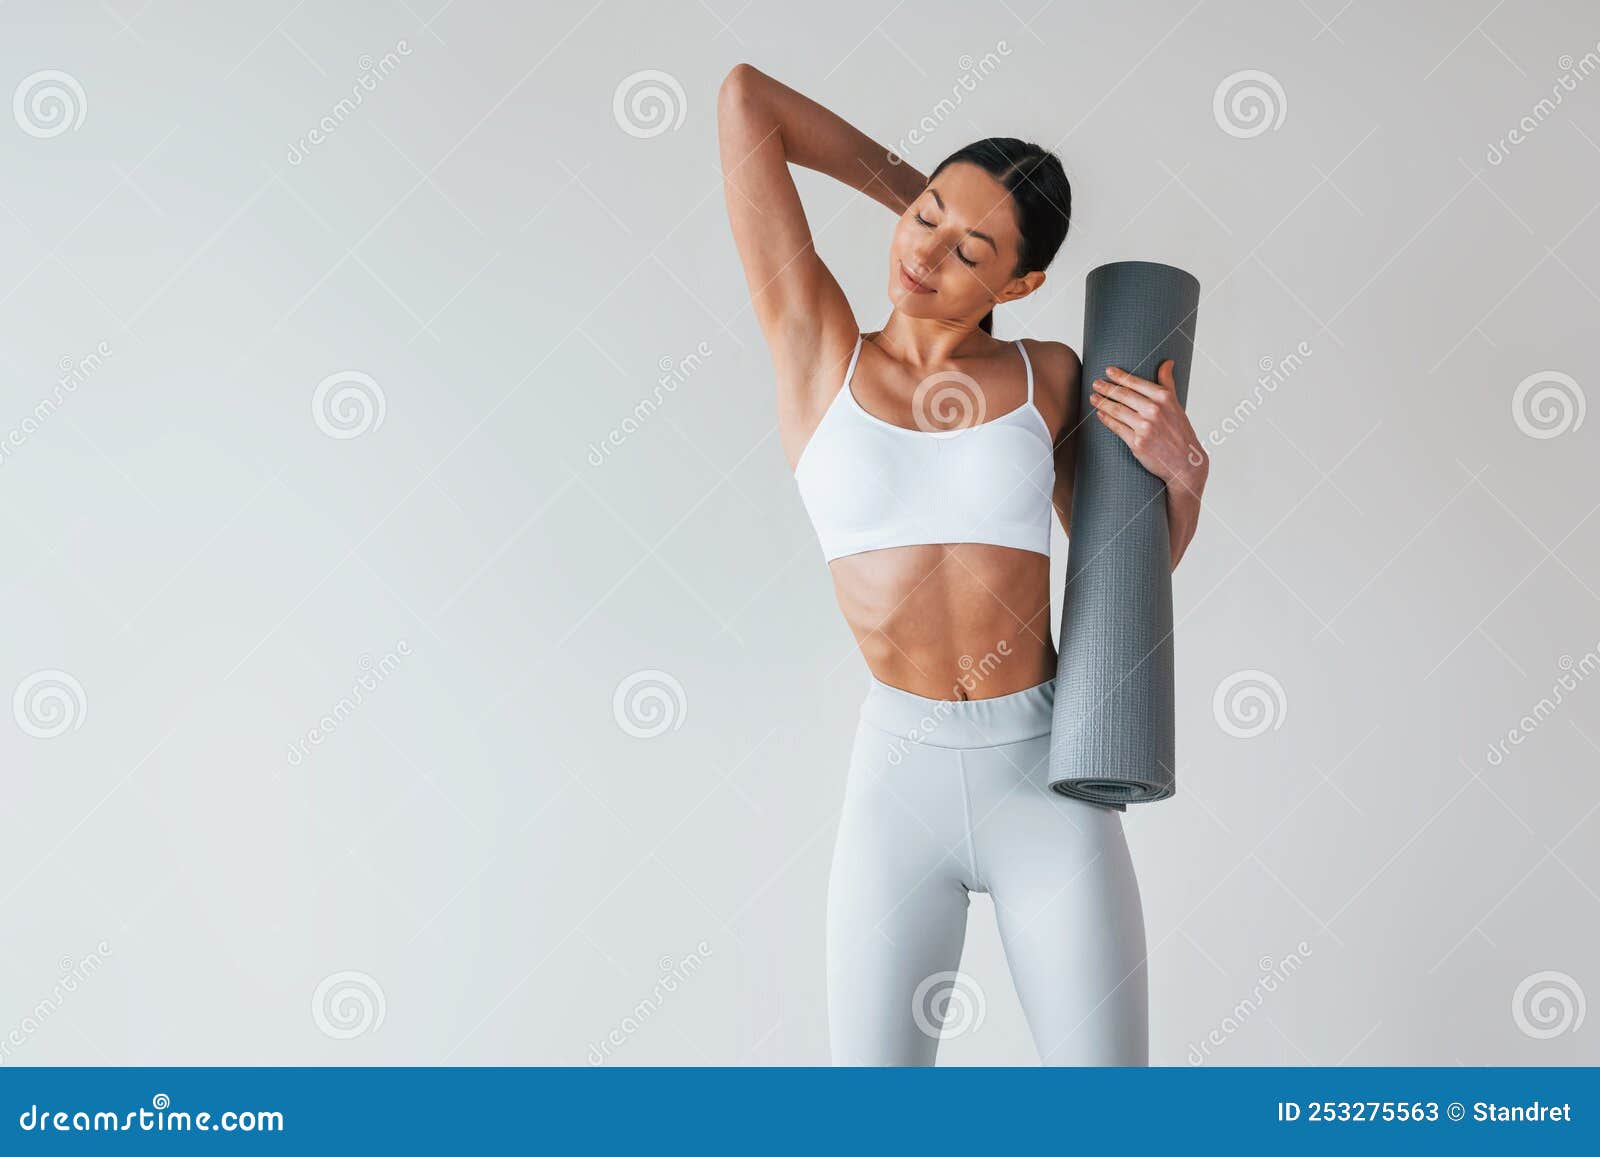 With Yoga Mat. Woman with Sportive Slim Body Type in Underwear